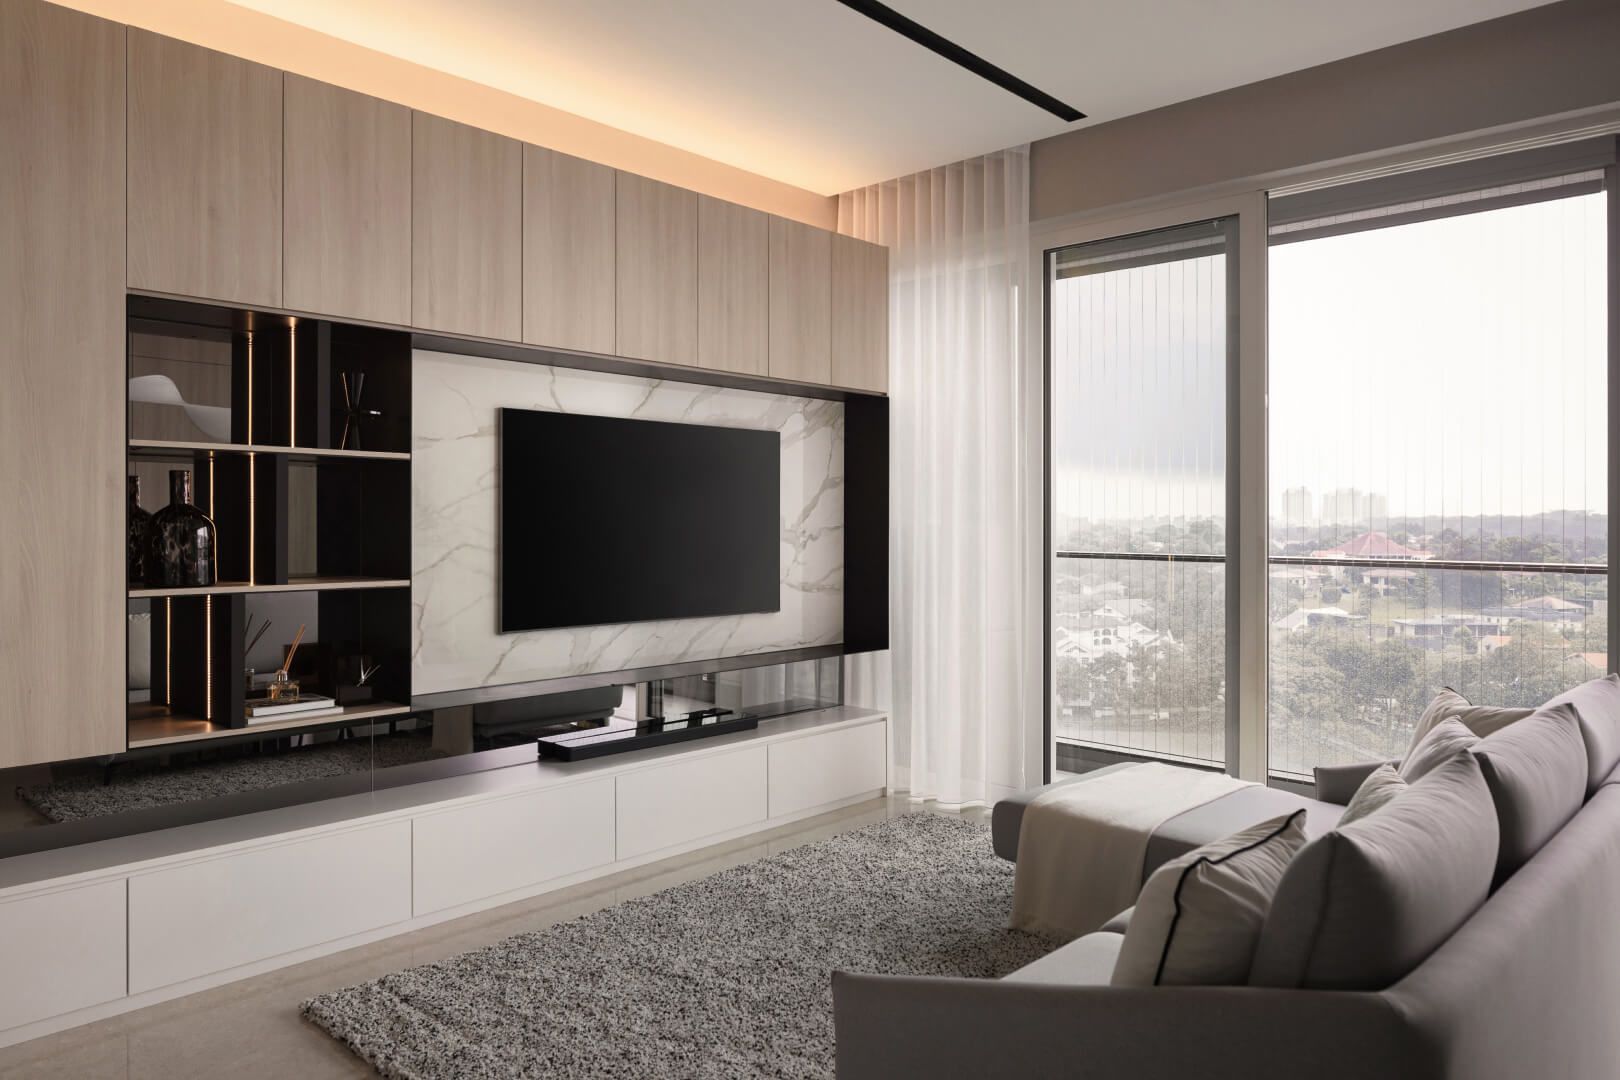 Luxurious living room with marble TV wall, sleek built-in shelves, and full-length windows overlooking a cityscape.